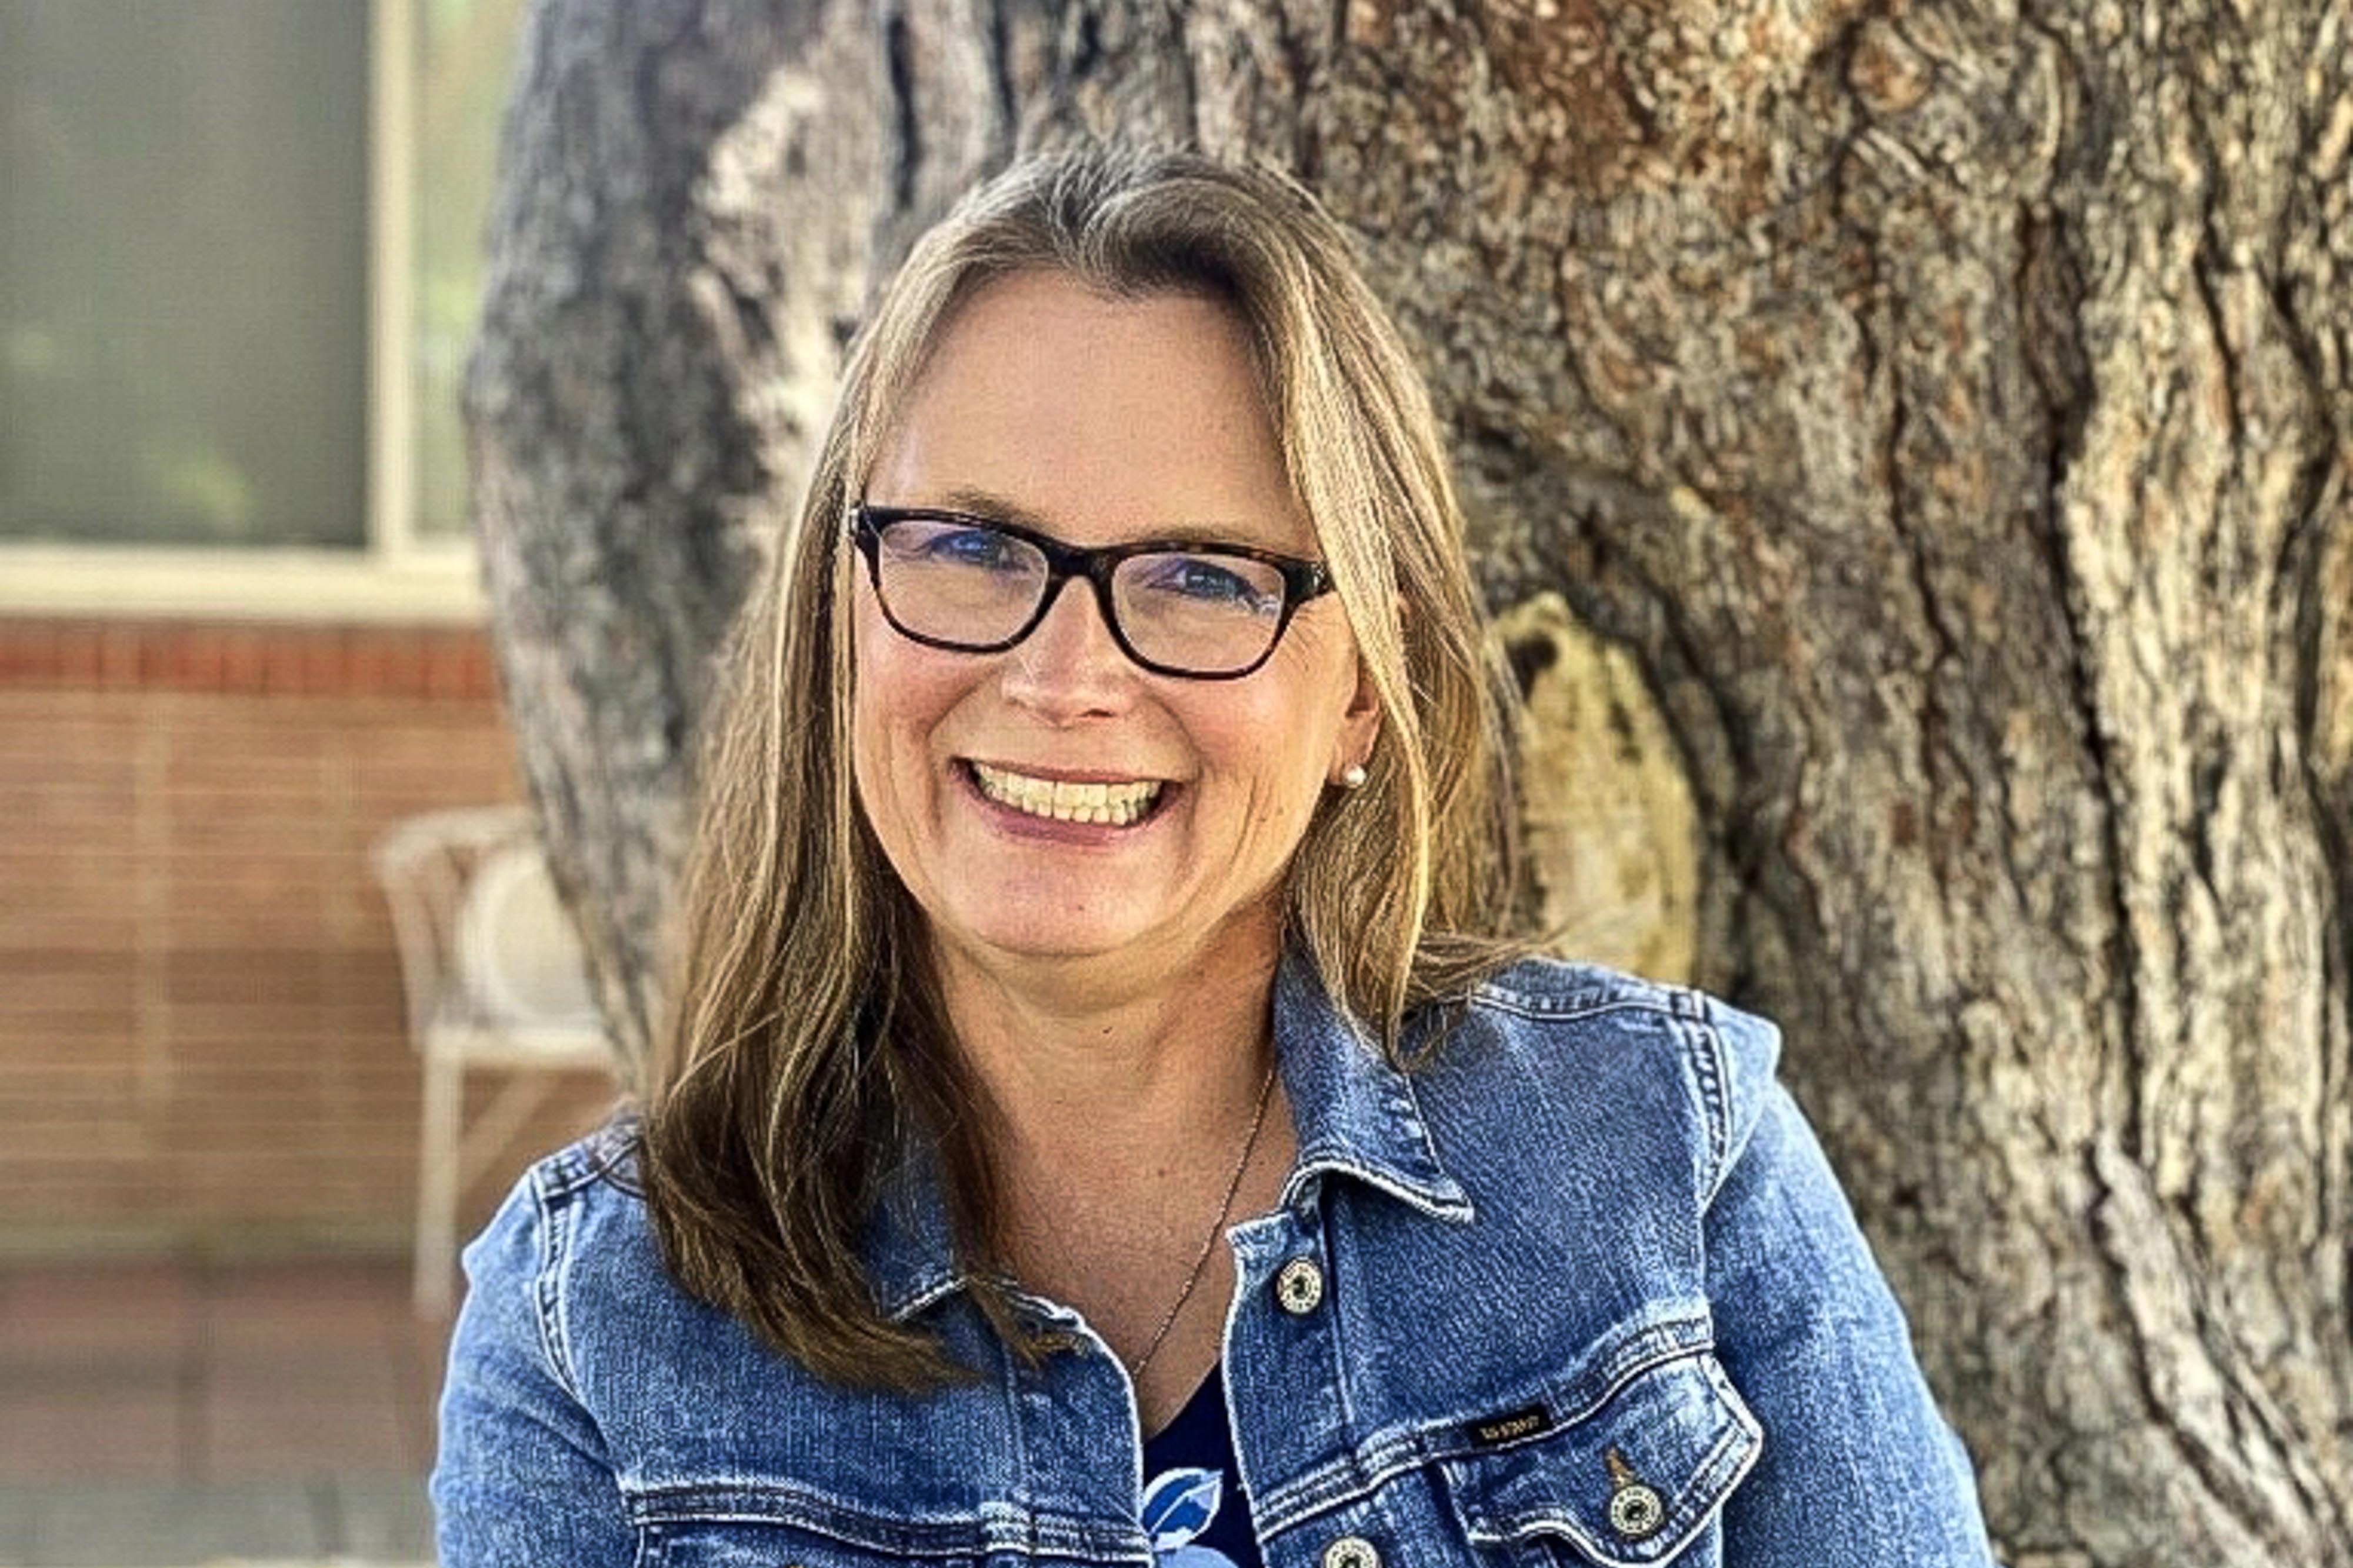 A portrait of Denver school board candidate Carrie Olson, who is sitting against a tree wearing denim jacket and glasses.